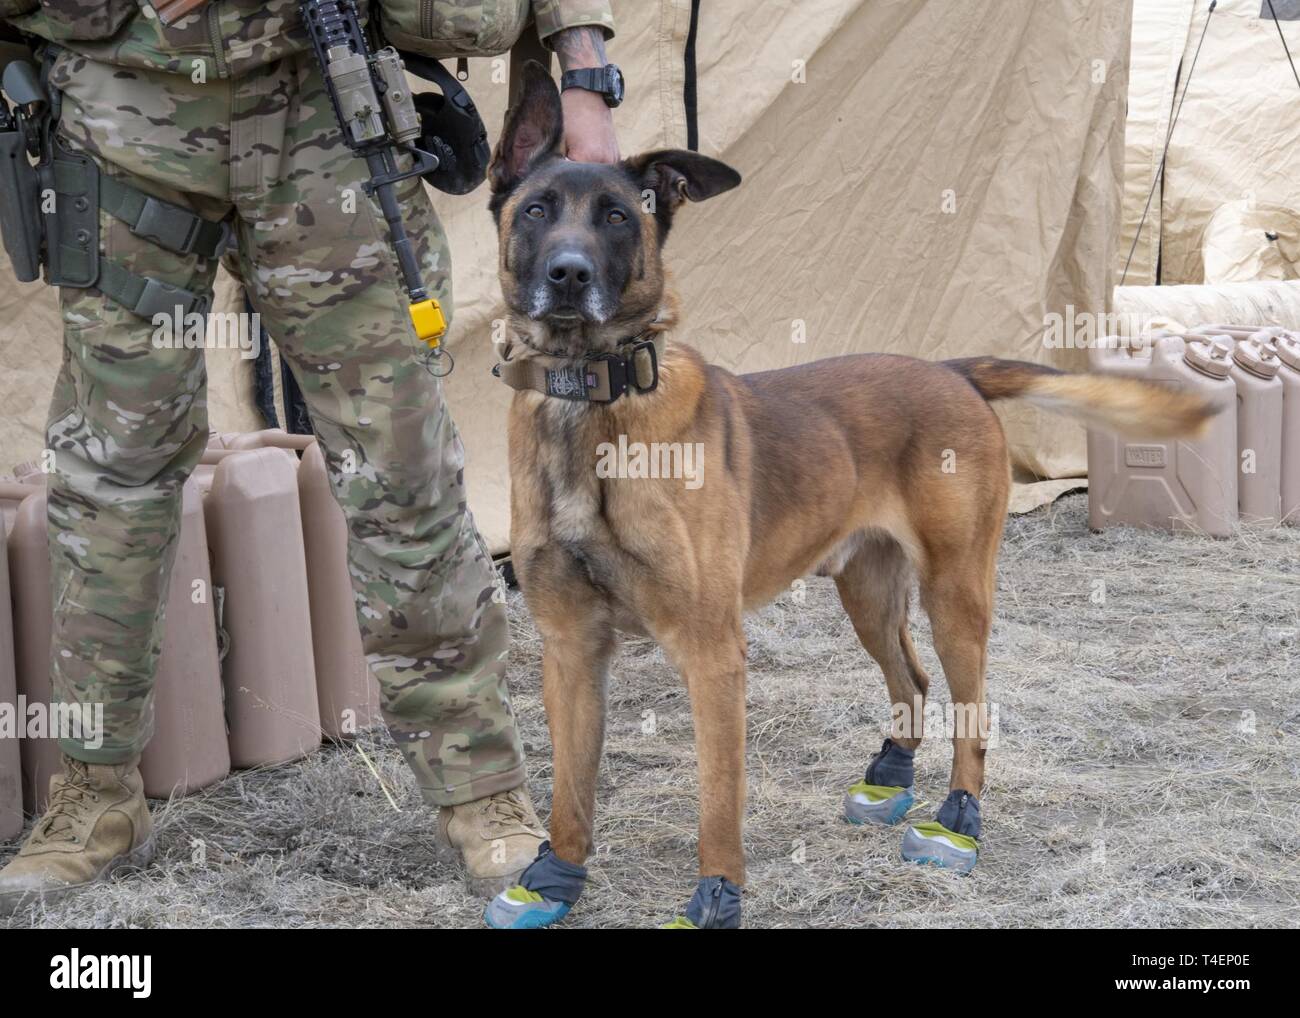 Vito, 823d Base Defense Squadron military working dog, patrols a forward operating location with his handler, Staff Sgt. Damien Dennis, during the Mission Readiness Exercise (MRX) at Camp Guernsey, Wyo., March 25, 2019. Vito wore booties to protect his feet from the rocky terrain and to help keep him warm in the cold Wyoming weather. Stock Photo